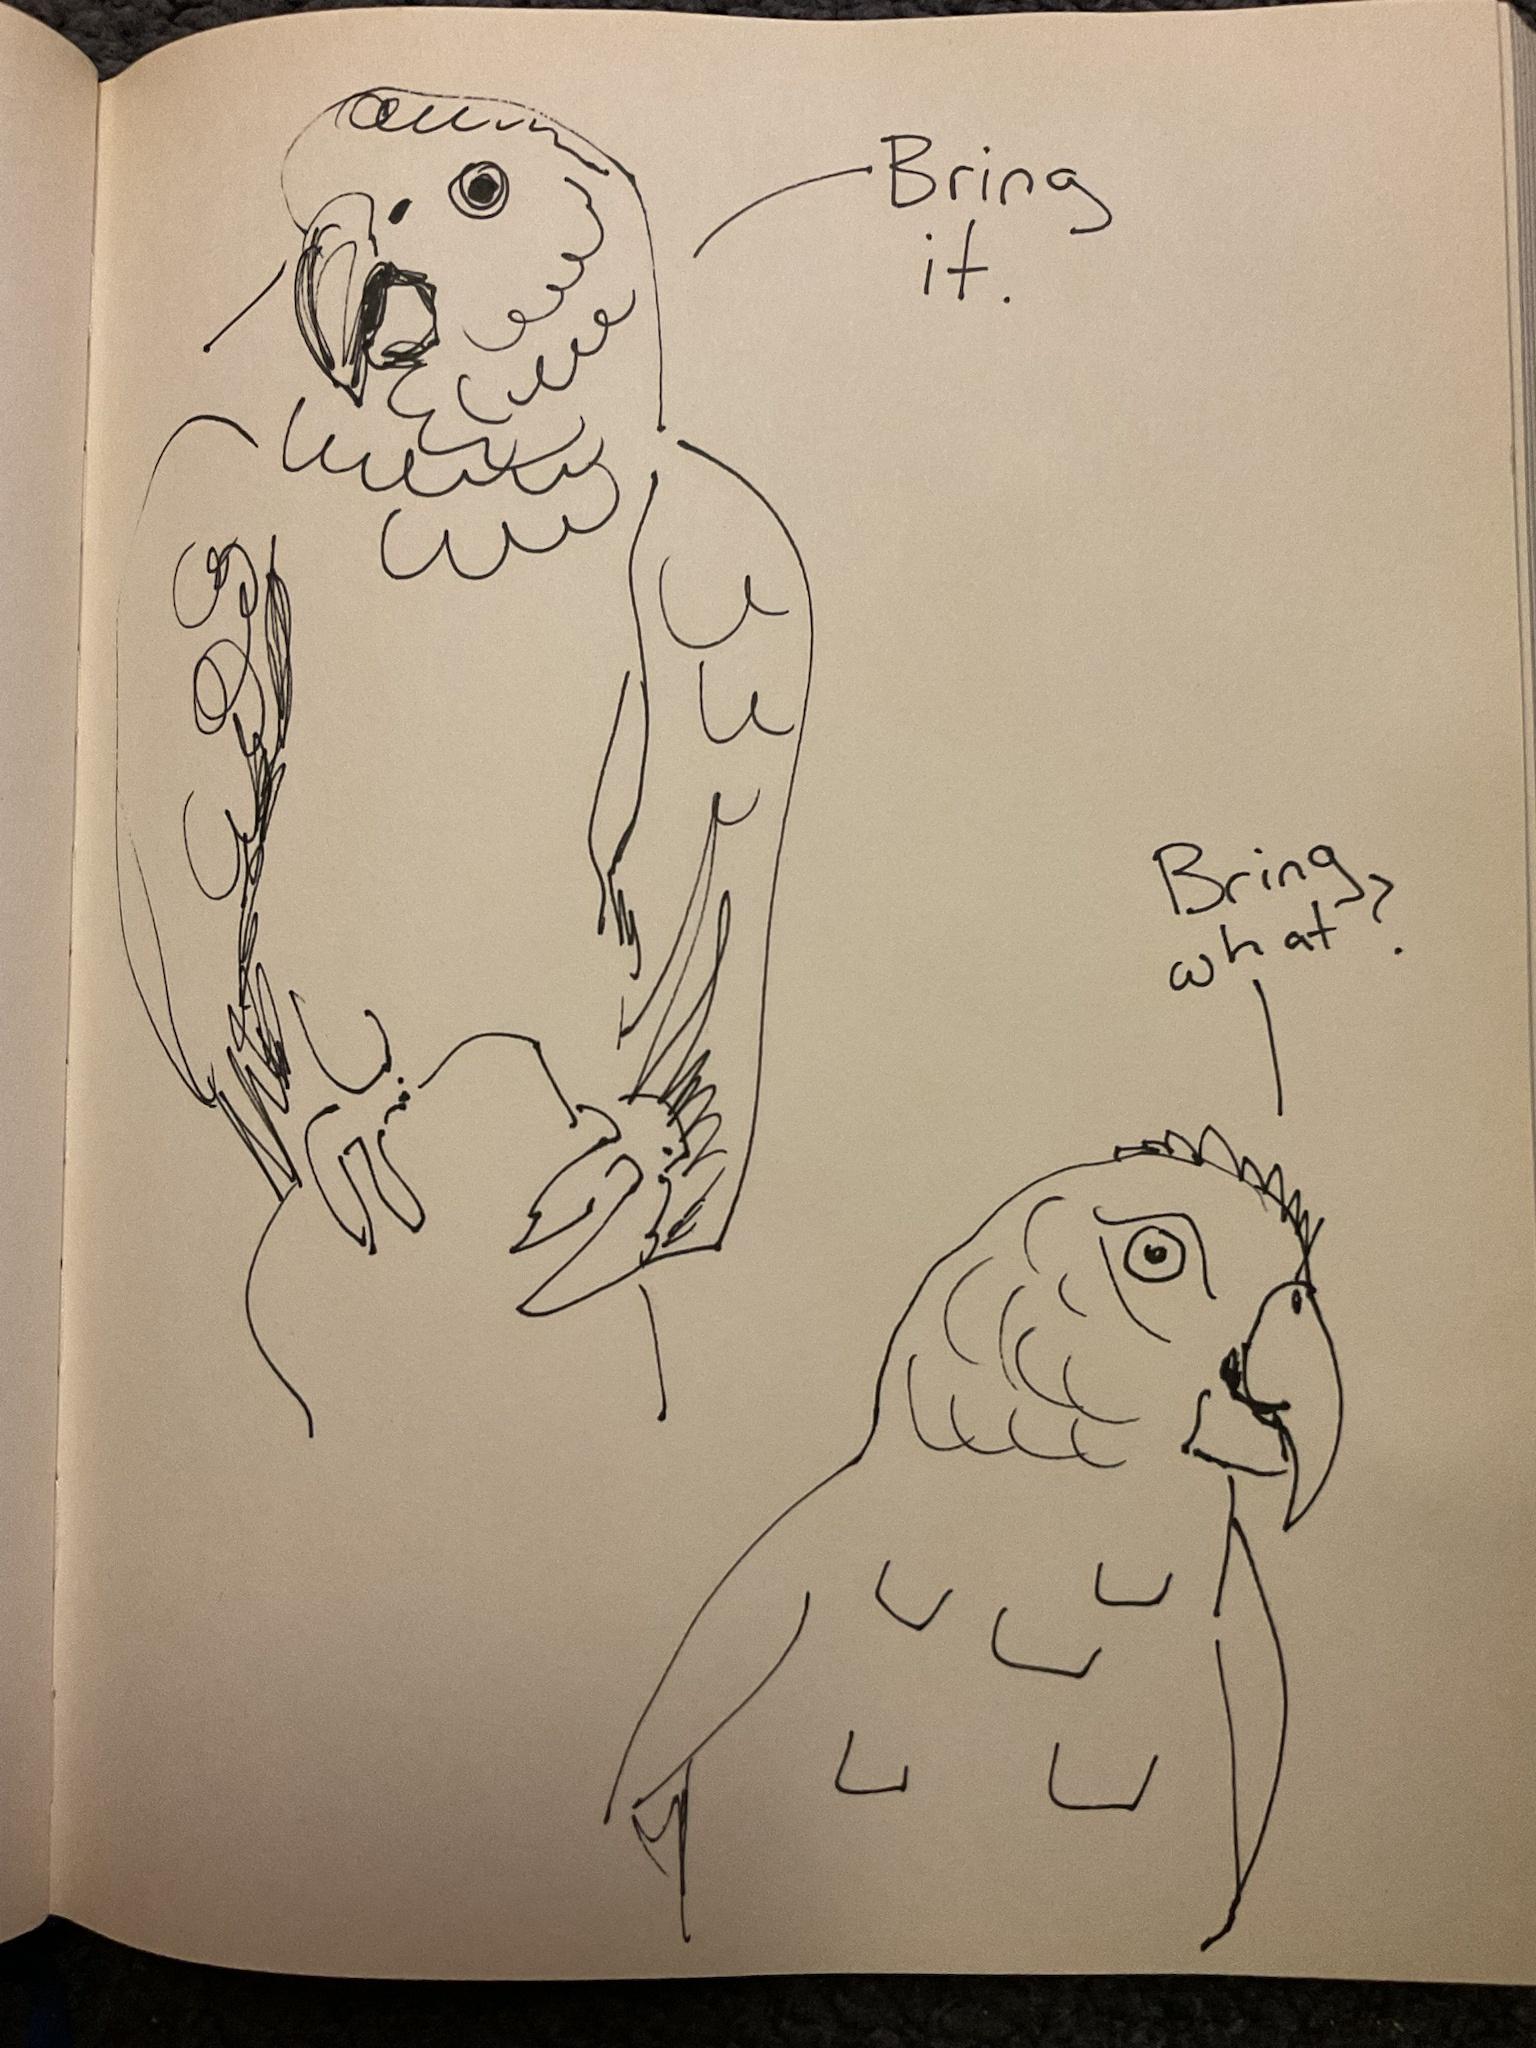 Silly Parrots, Share 1